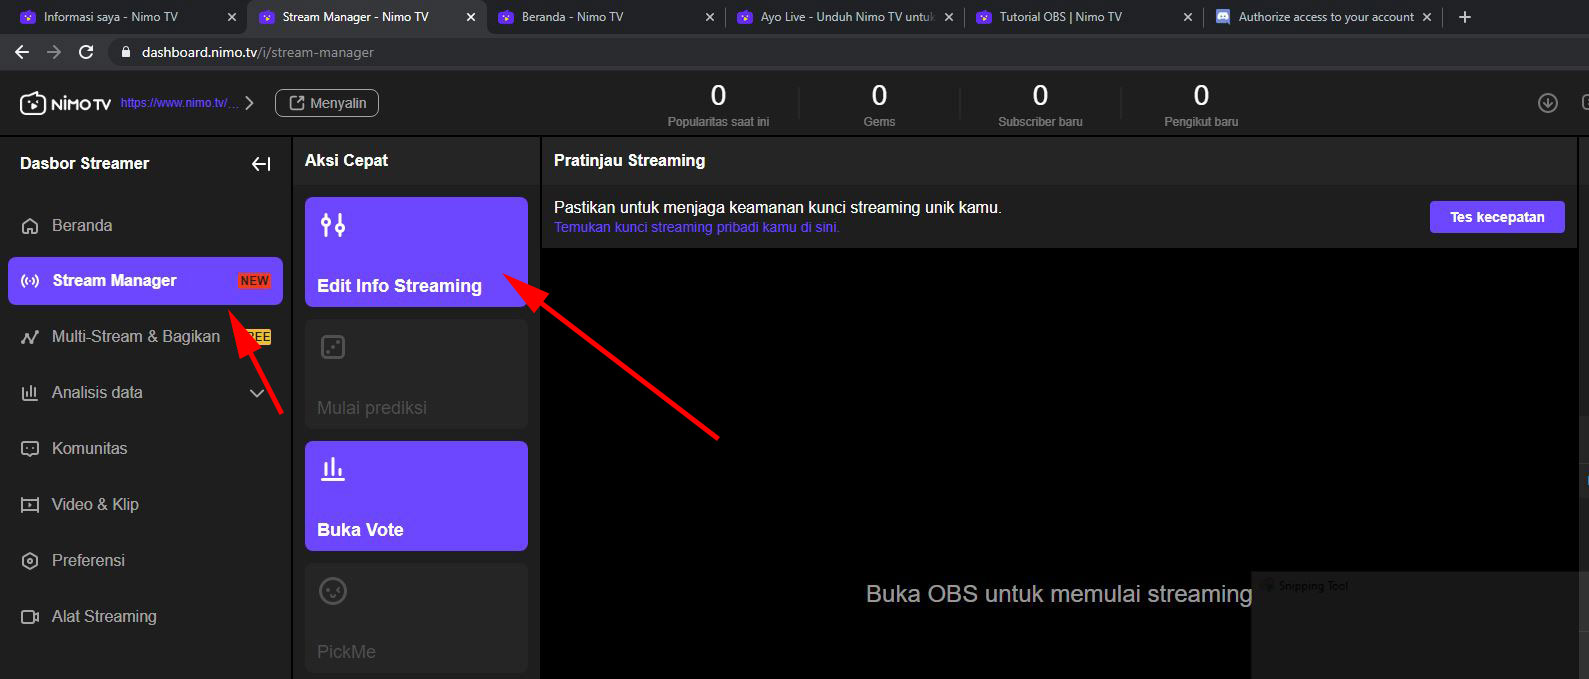 Stream Manager - Edit Info Streaming - Nimo TV